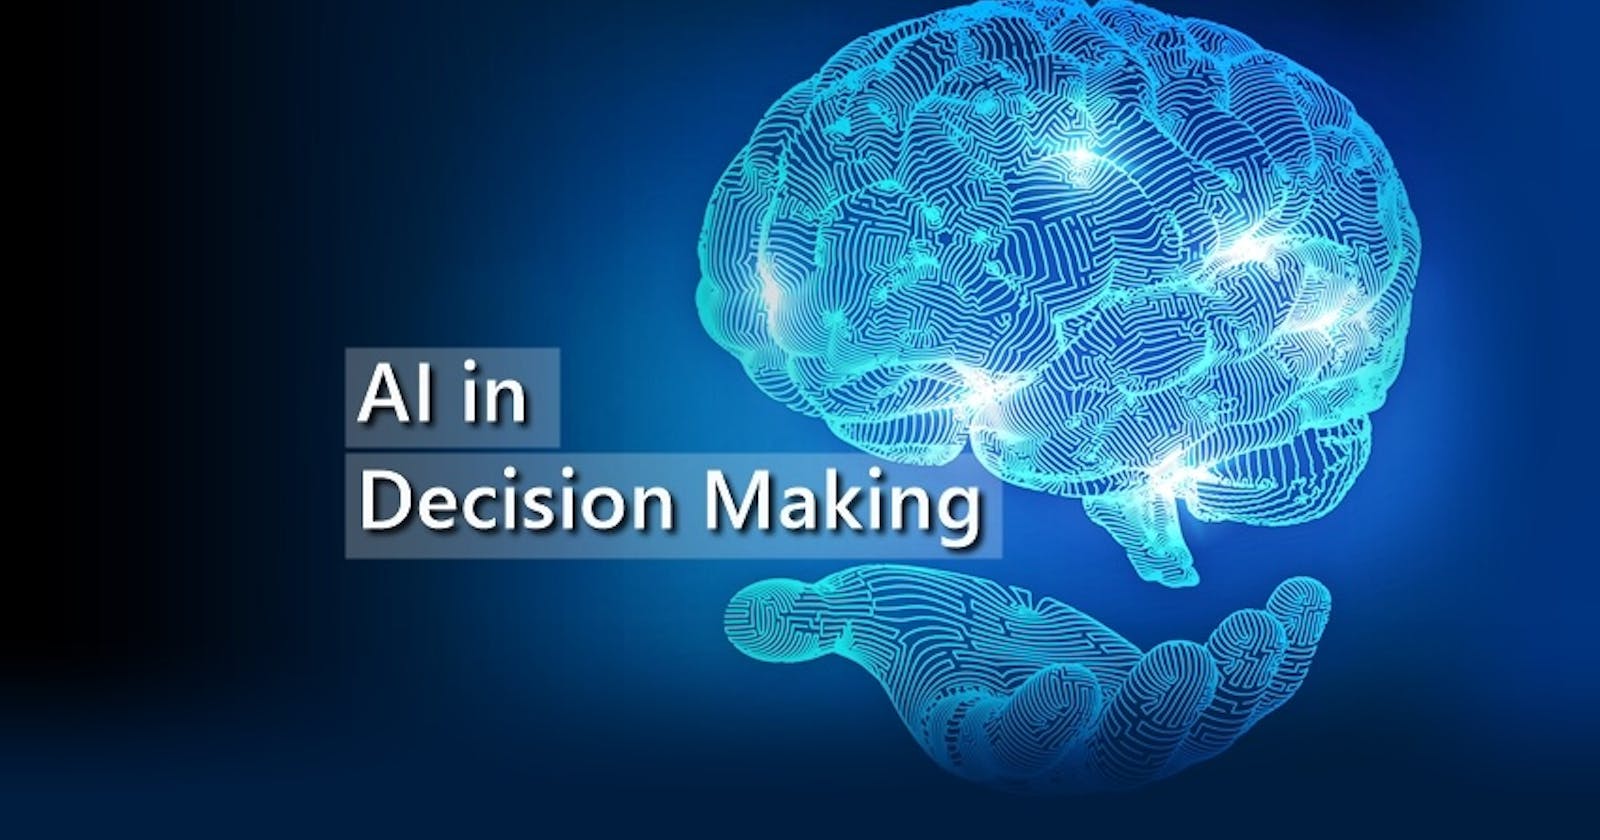 The role of Artificial Intelligence in improving Decision-making and Unmaking tasks.